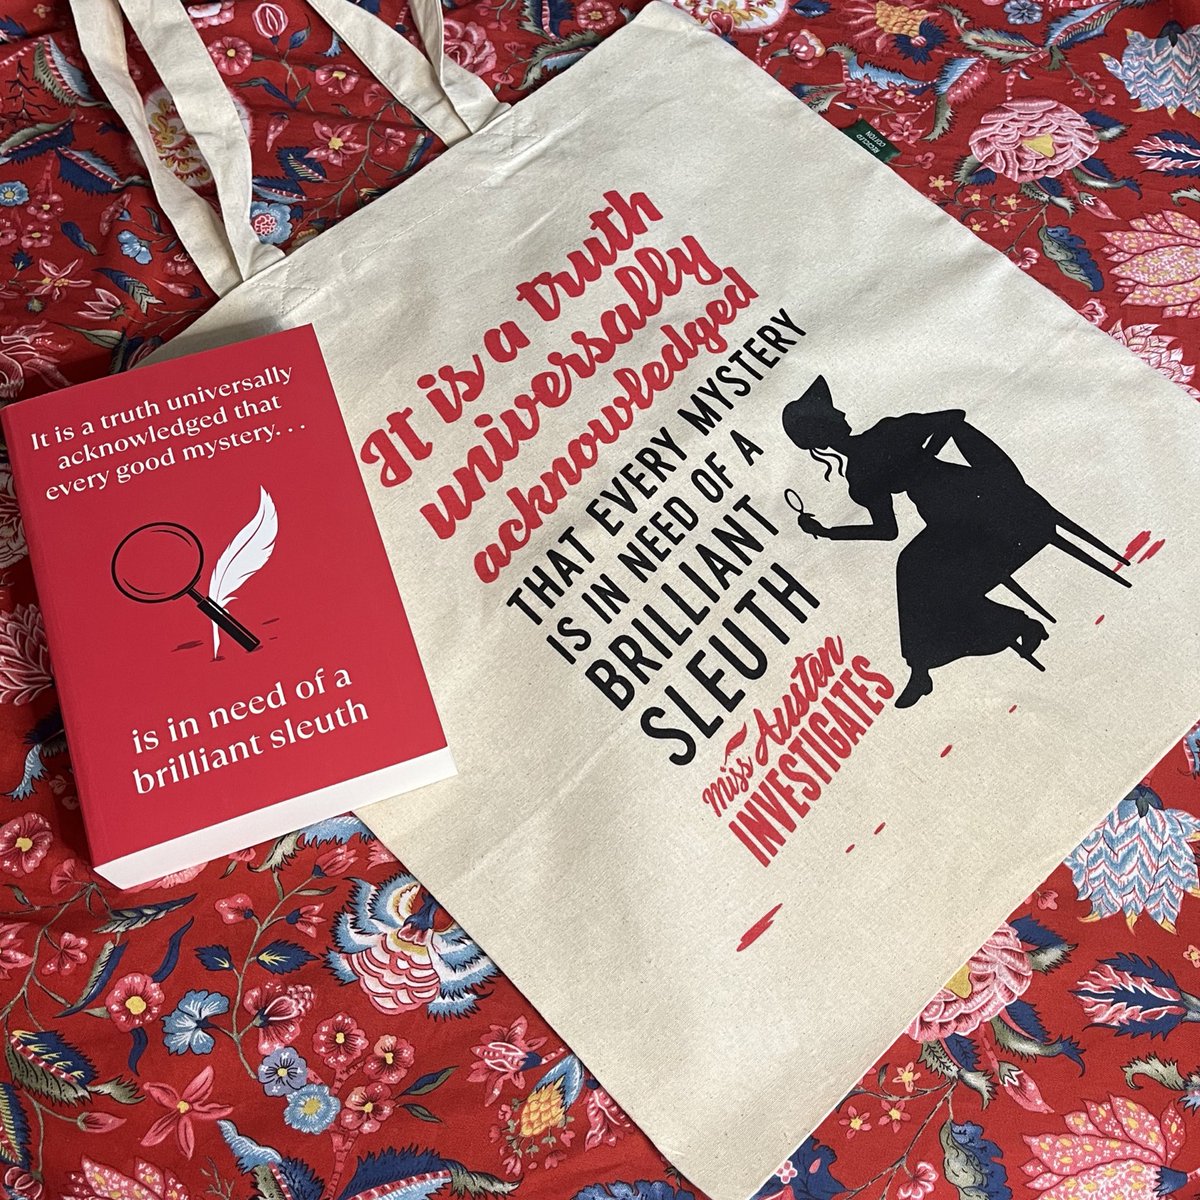 👒🪶 GIVEAWAY 🔍🥰 By the magic of Austen, I have a  #MissAustenInvestigates proof & tote for one lucky winner! To enter, follow, like and RT this post. UK only please. Ends midnight 5th Nov, and winner will be chosen and announced next day. Good luck! #giveaway #BookTwitter